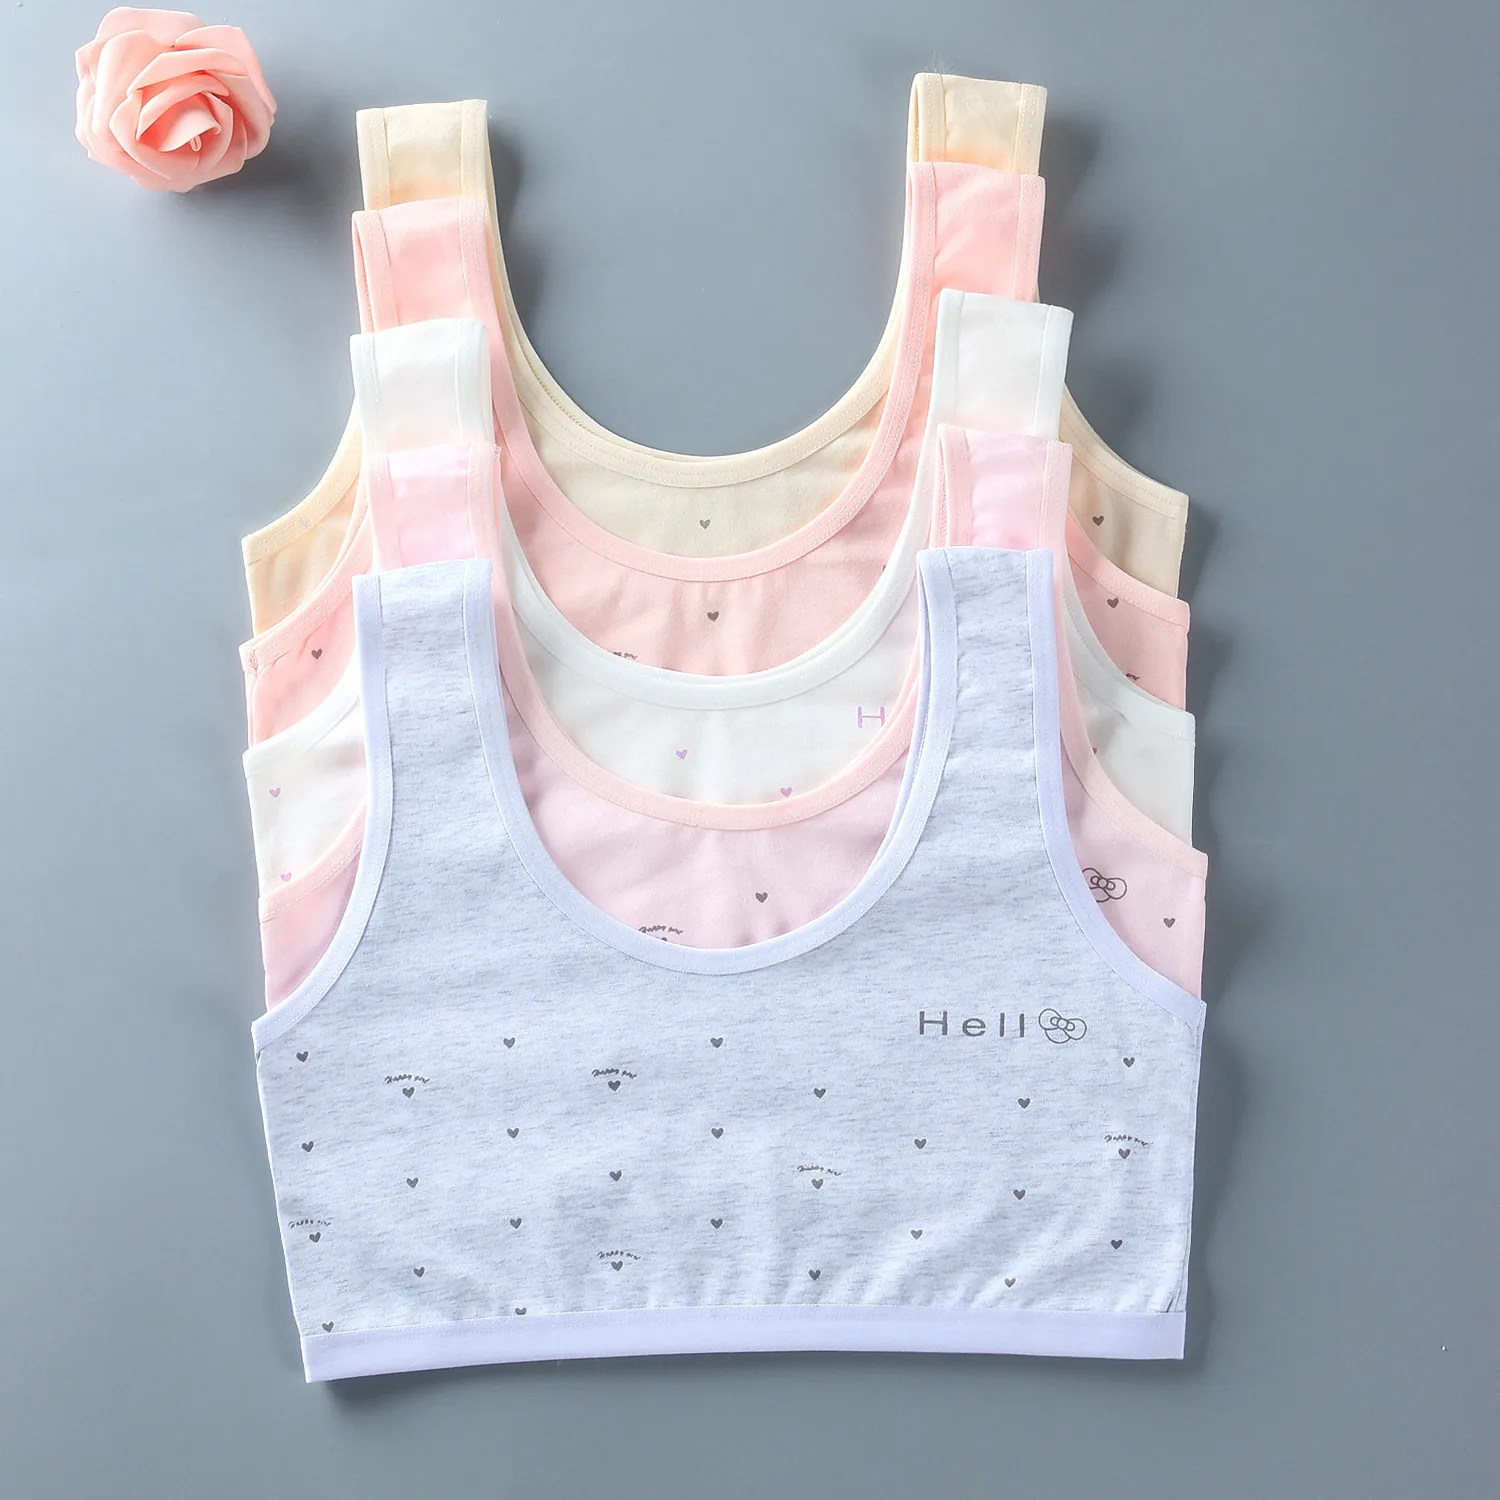 Girls Underwear Small Vest Sling Children Bra Development Cotton Students Breast Wrapping Puberty Teens Bra For 12-16 Years Old